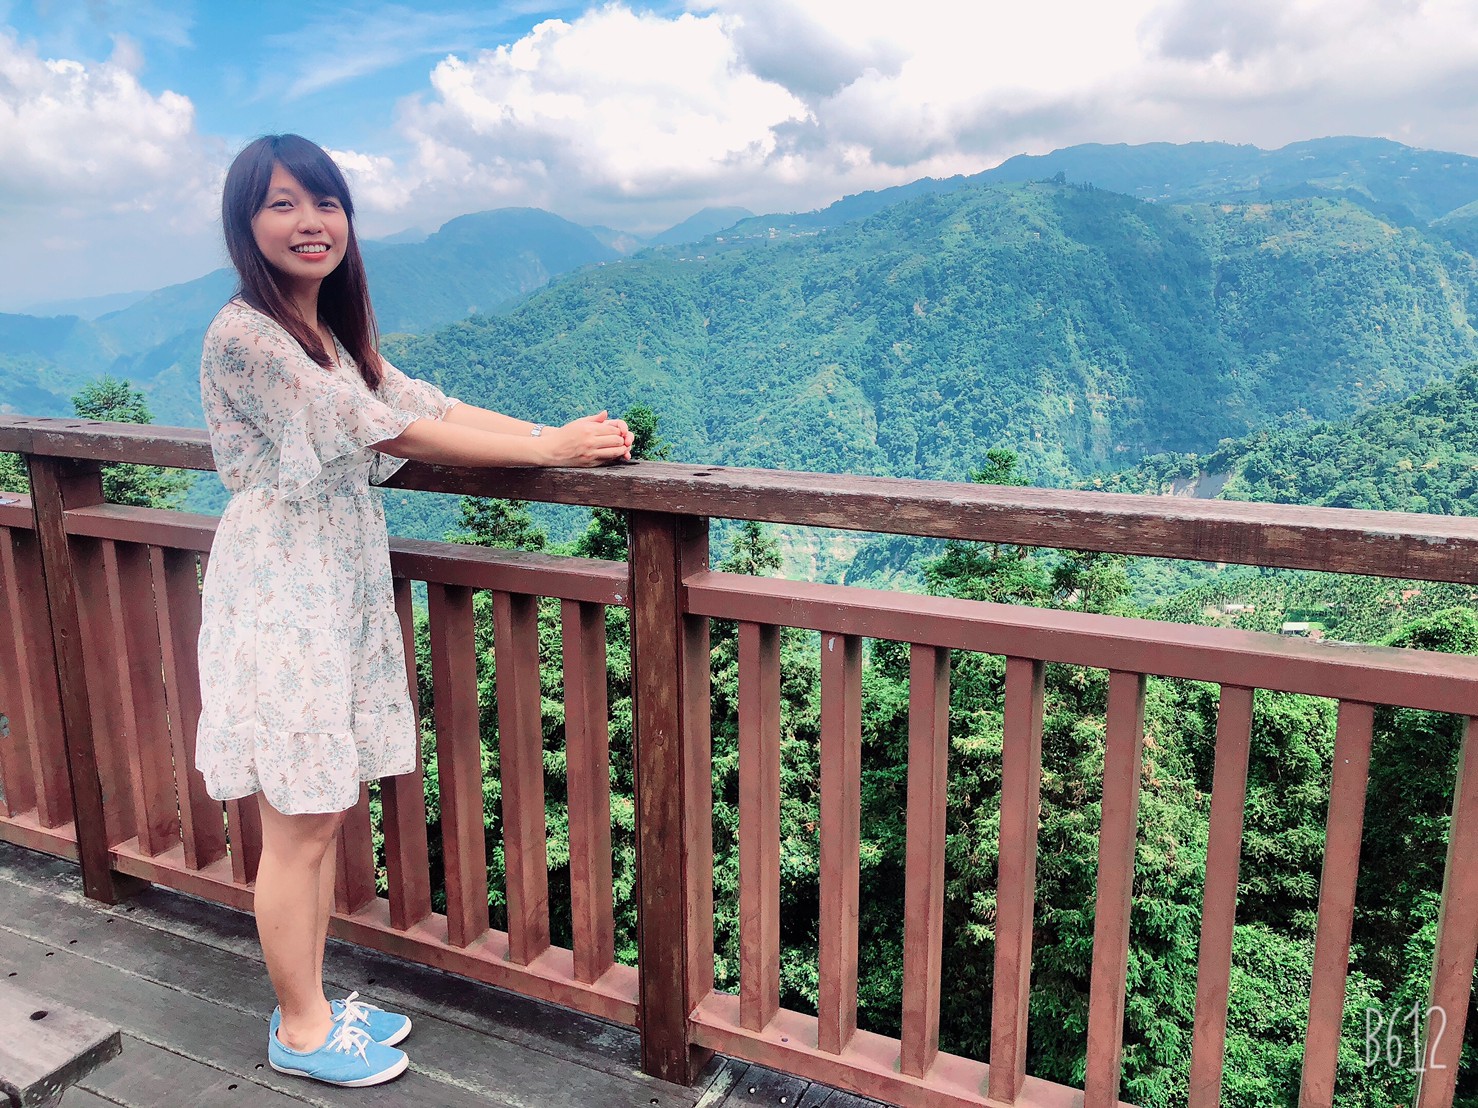 Teaching English and Living in Taiwan, Learning ㄅㄆㄇ and fit in Taiwan image